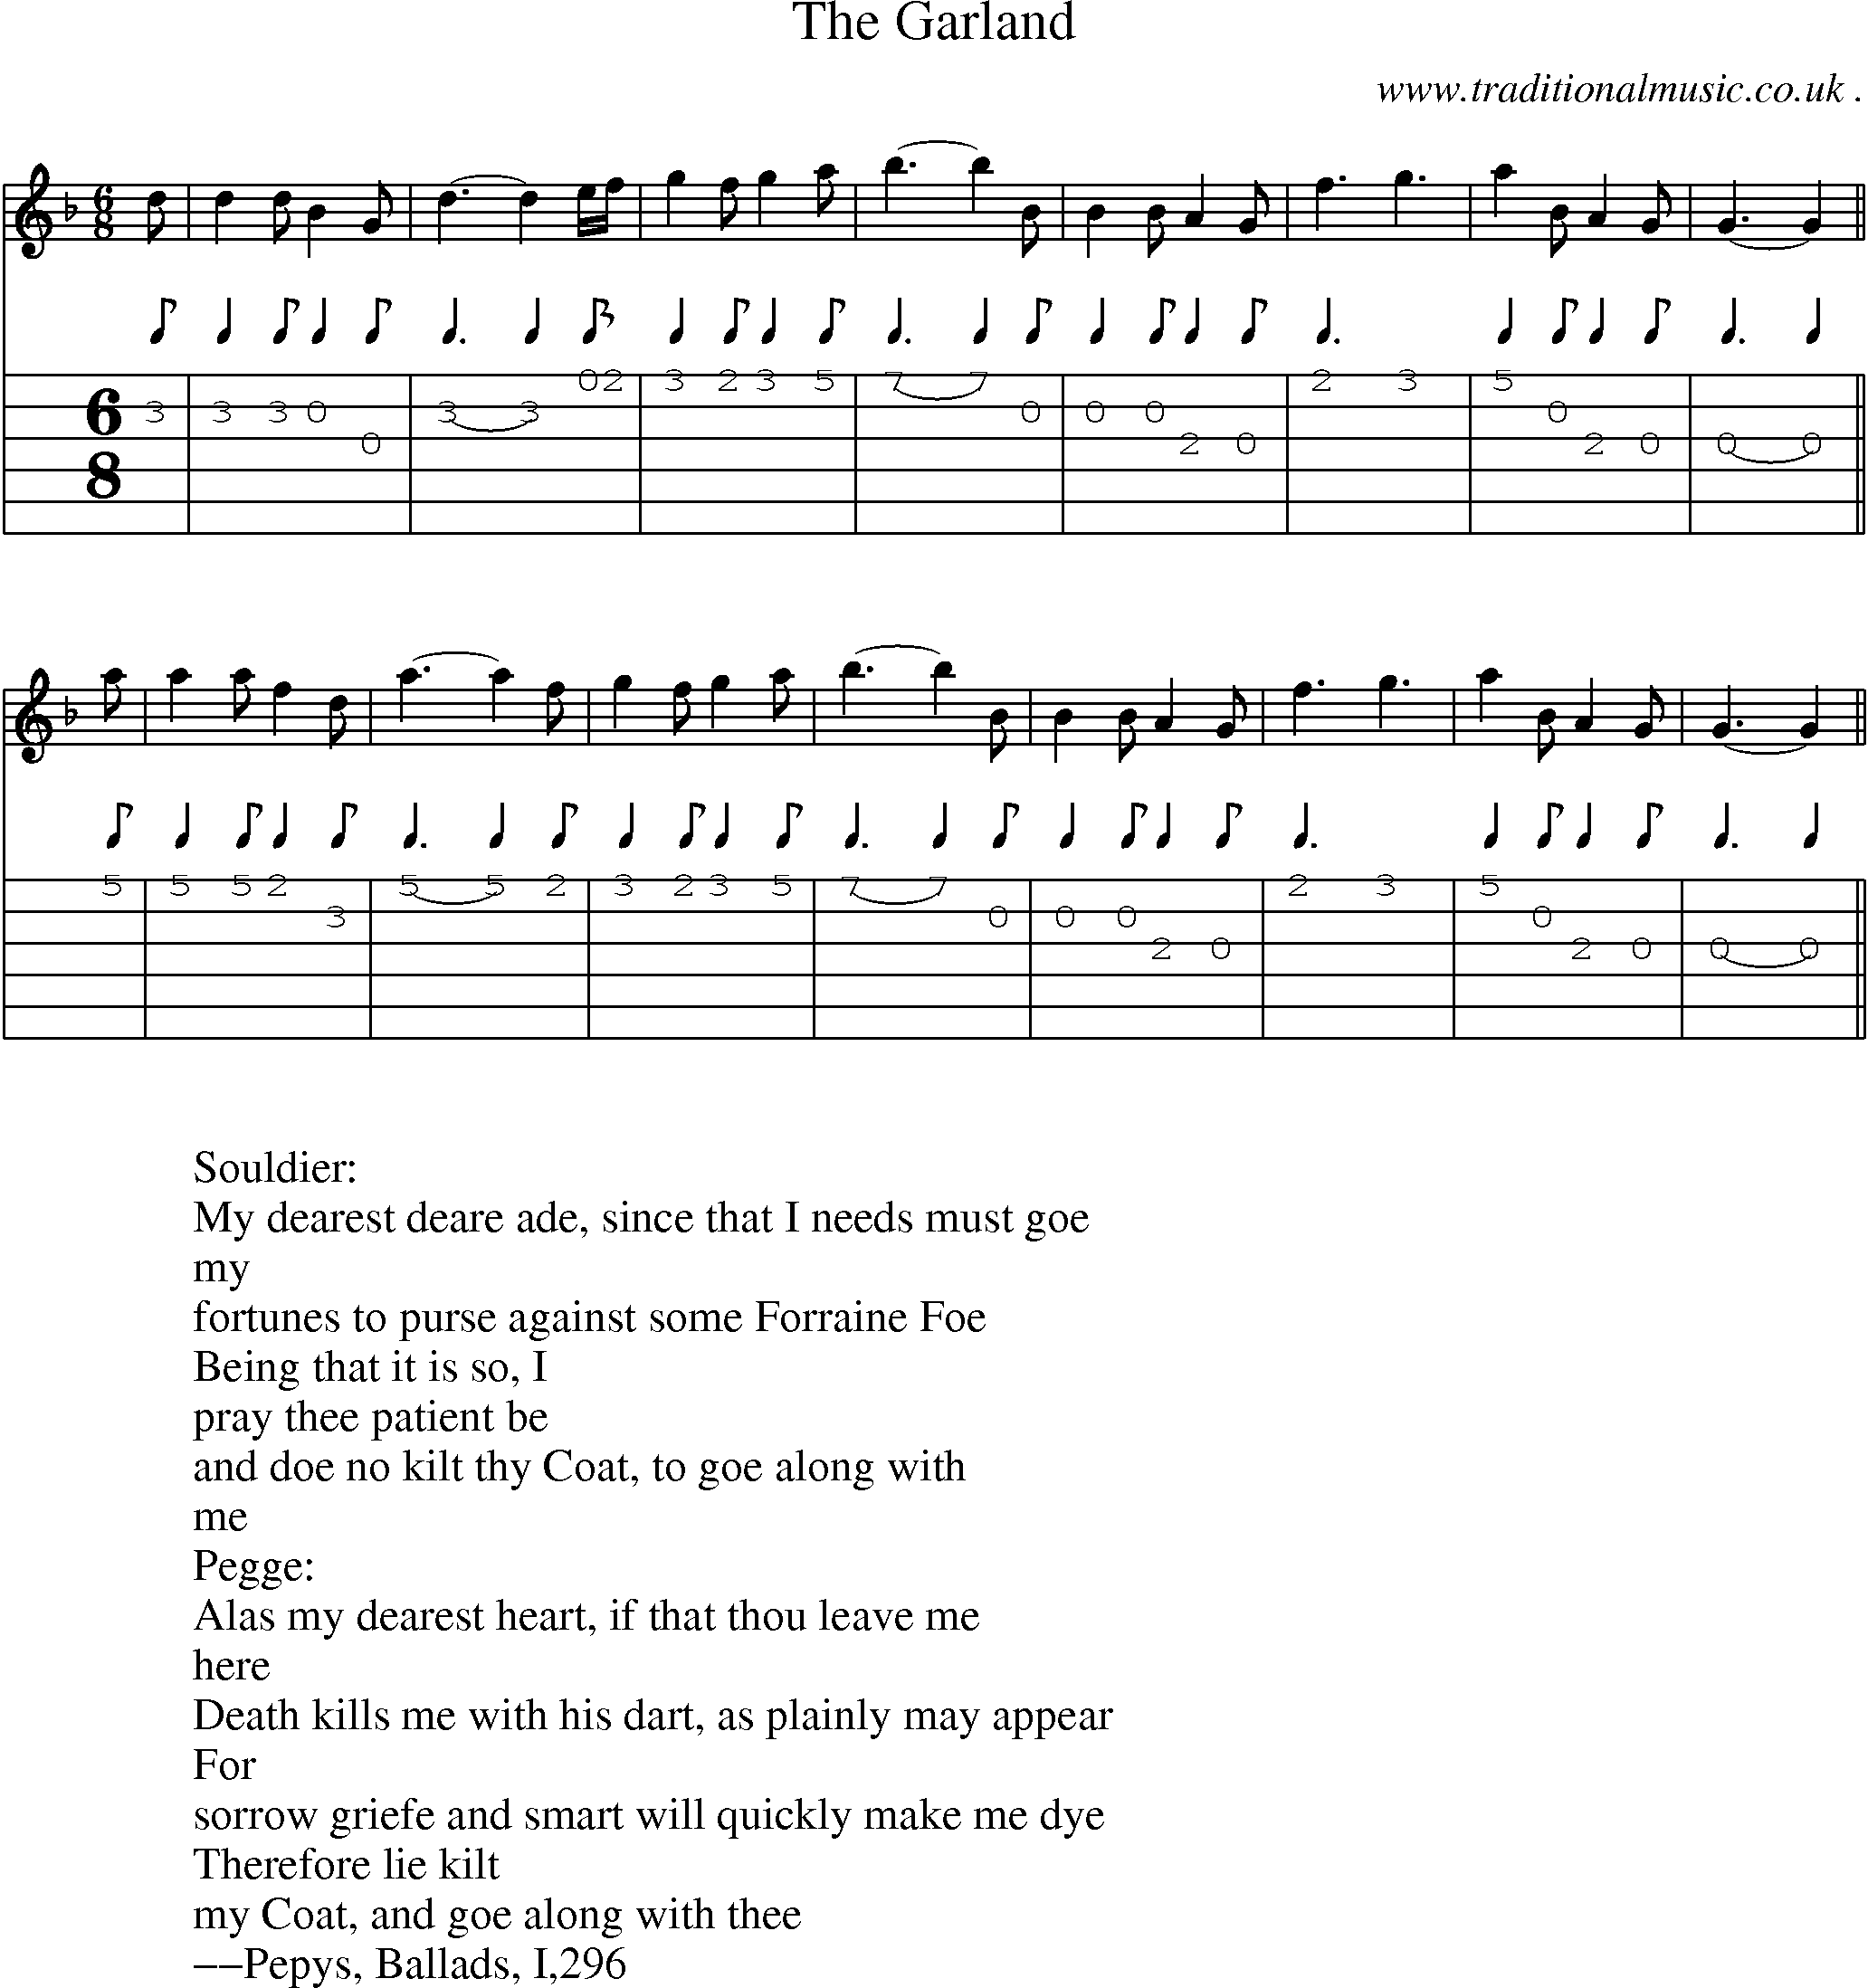 Sheet-Music and Guitar Tabs for The Garland